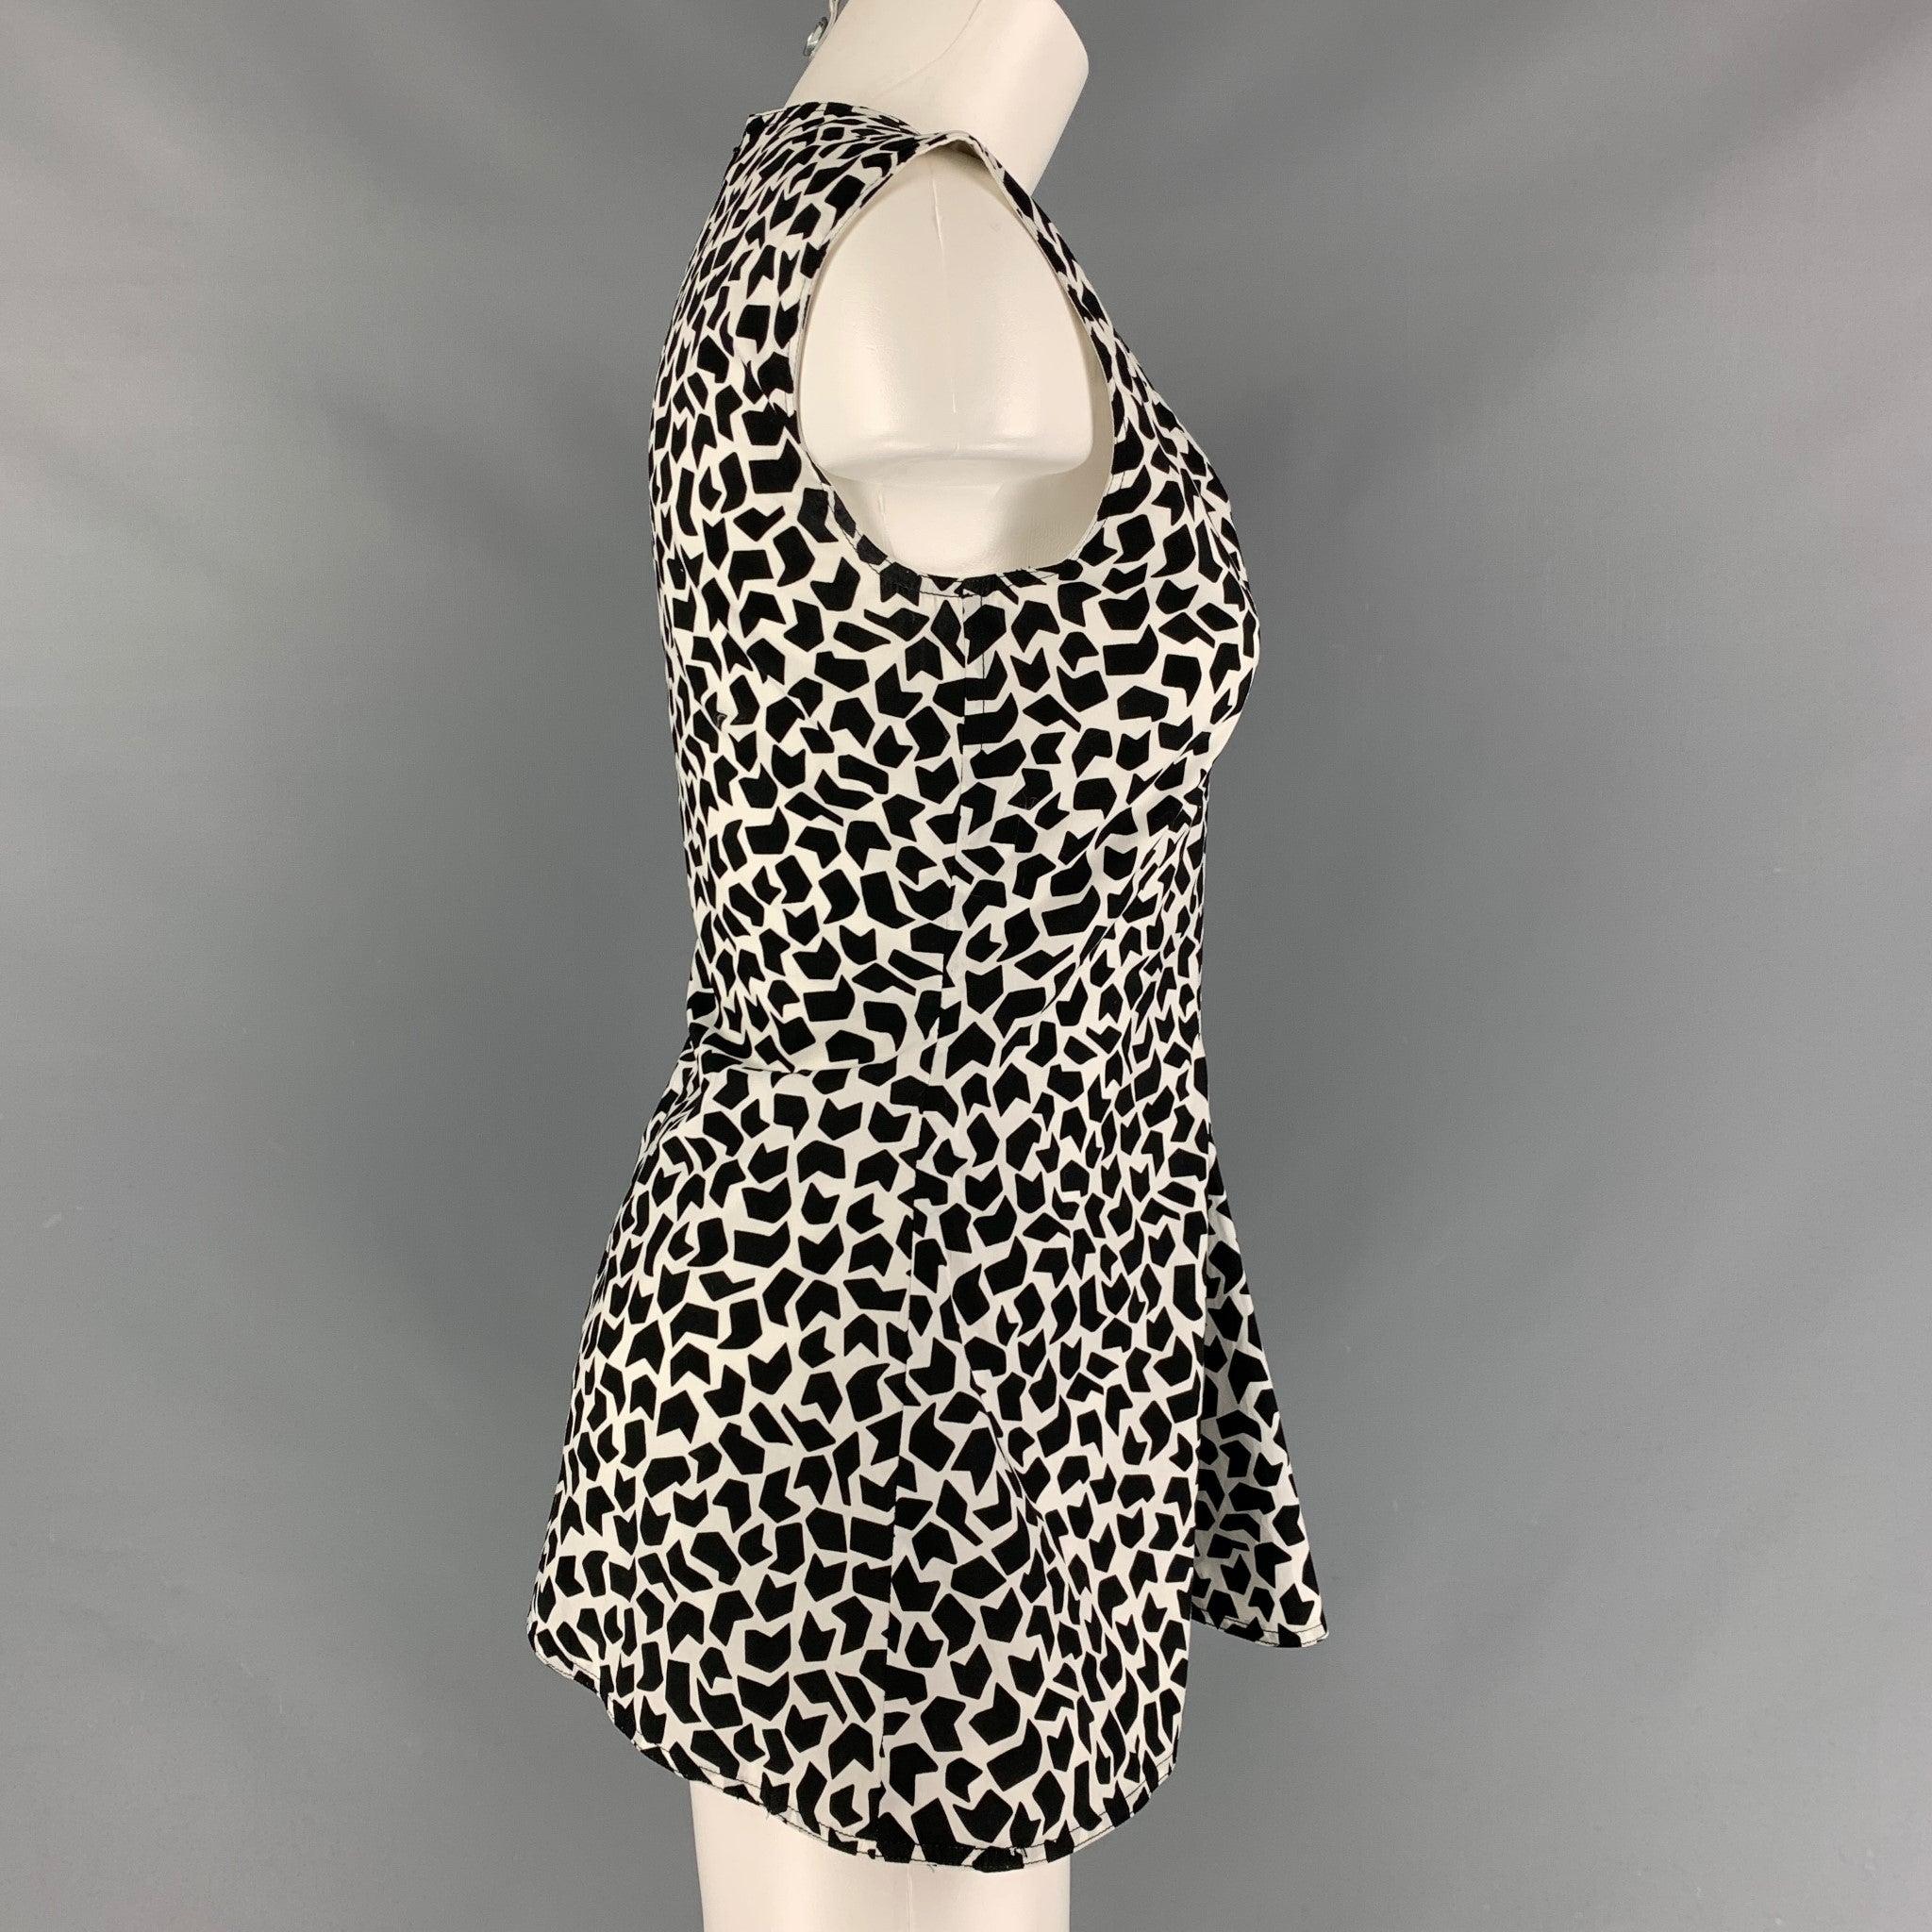 MARNI sleeveless tunic comes in a black and white abstract print cotton poplin featuring an open V-neck shape, and full zip up closure at center back. Made in Italy.Excellent Pre-Owned Condition. 

Marked:   36 

Measurements: 
 
Shoulder: 16 inches